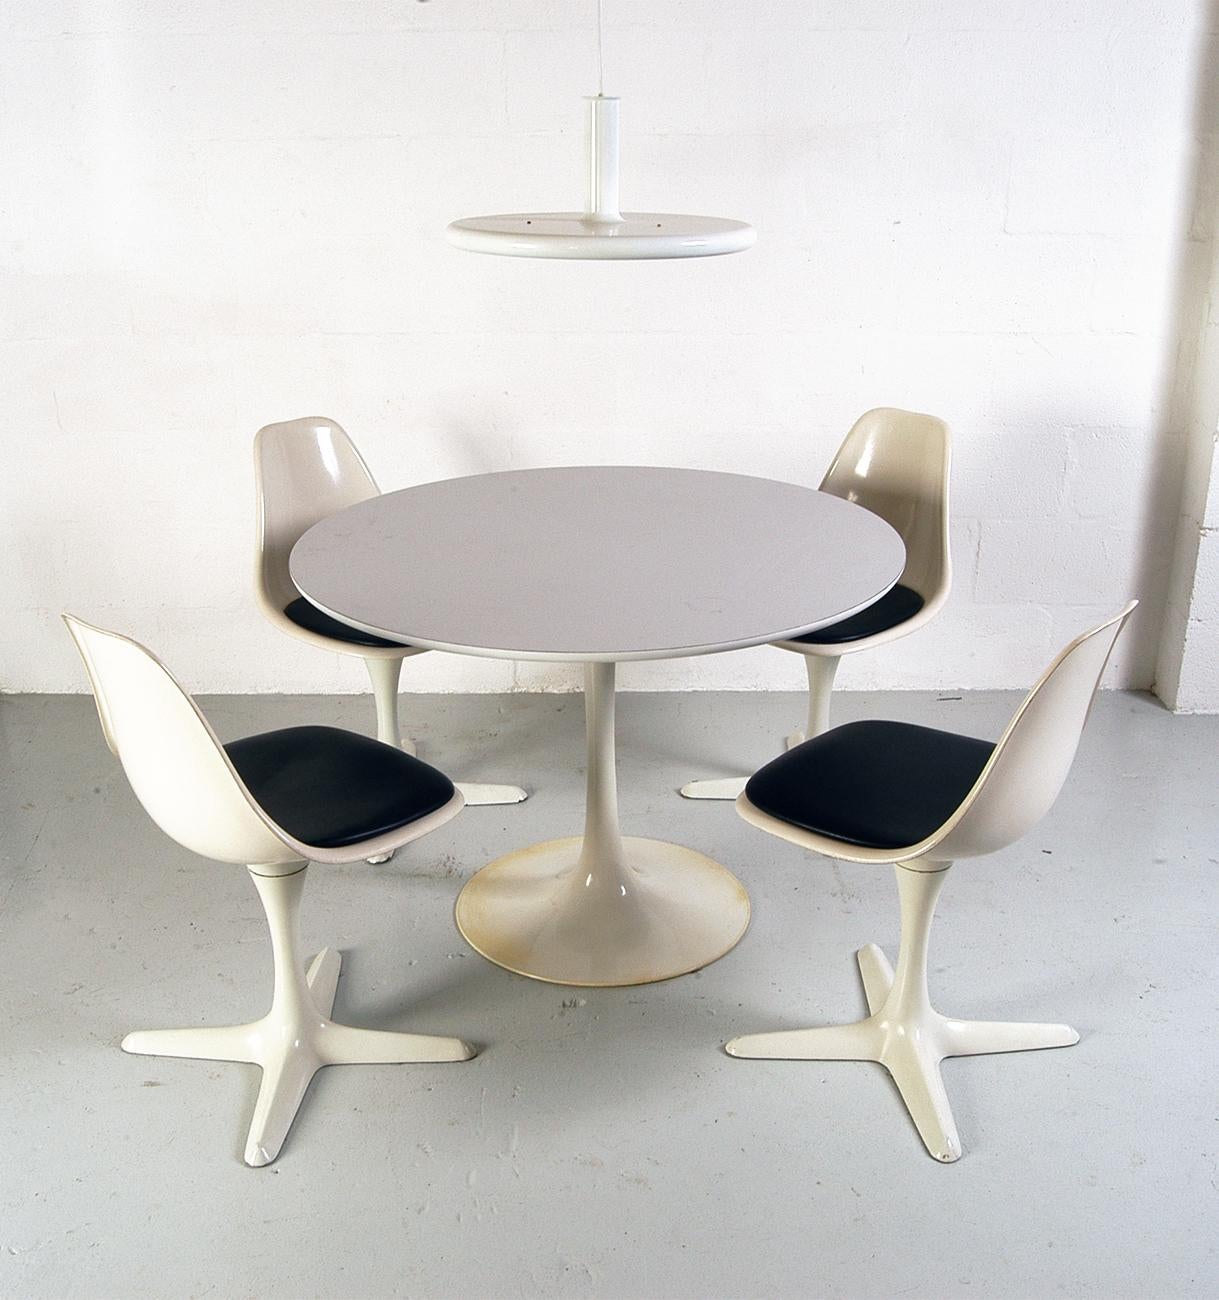 1960s Dining room suite by Maurice Burke for Arkana, Bath, England.
This terrific ‘Space Age’ dining suite consists of the table and four matching chairs and would have been the height of fashion when new in the early 1960s. All four chairs rotate